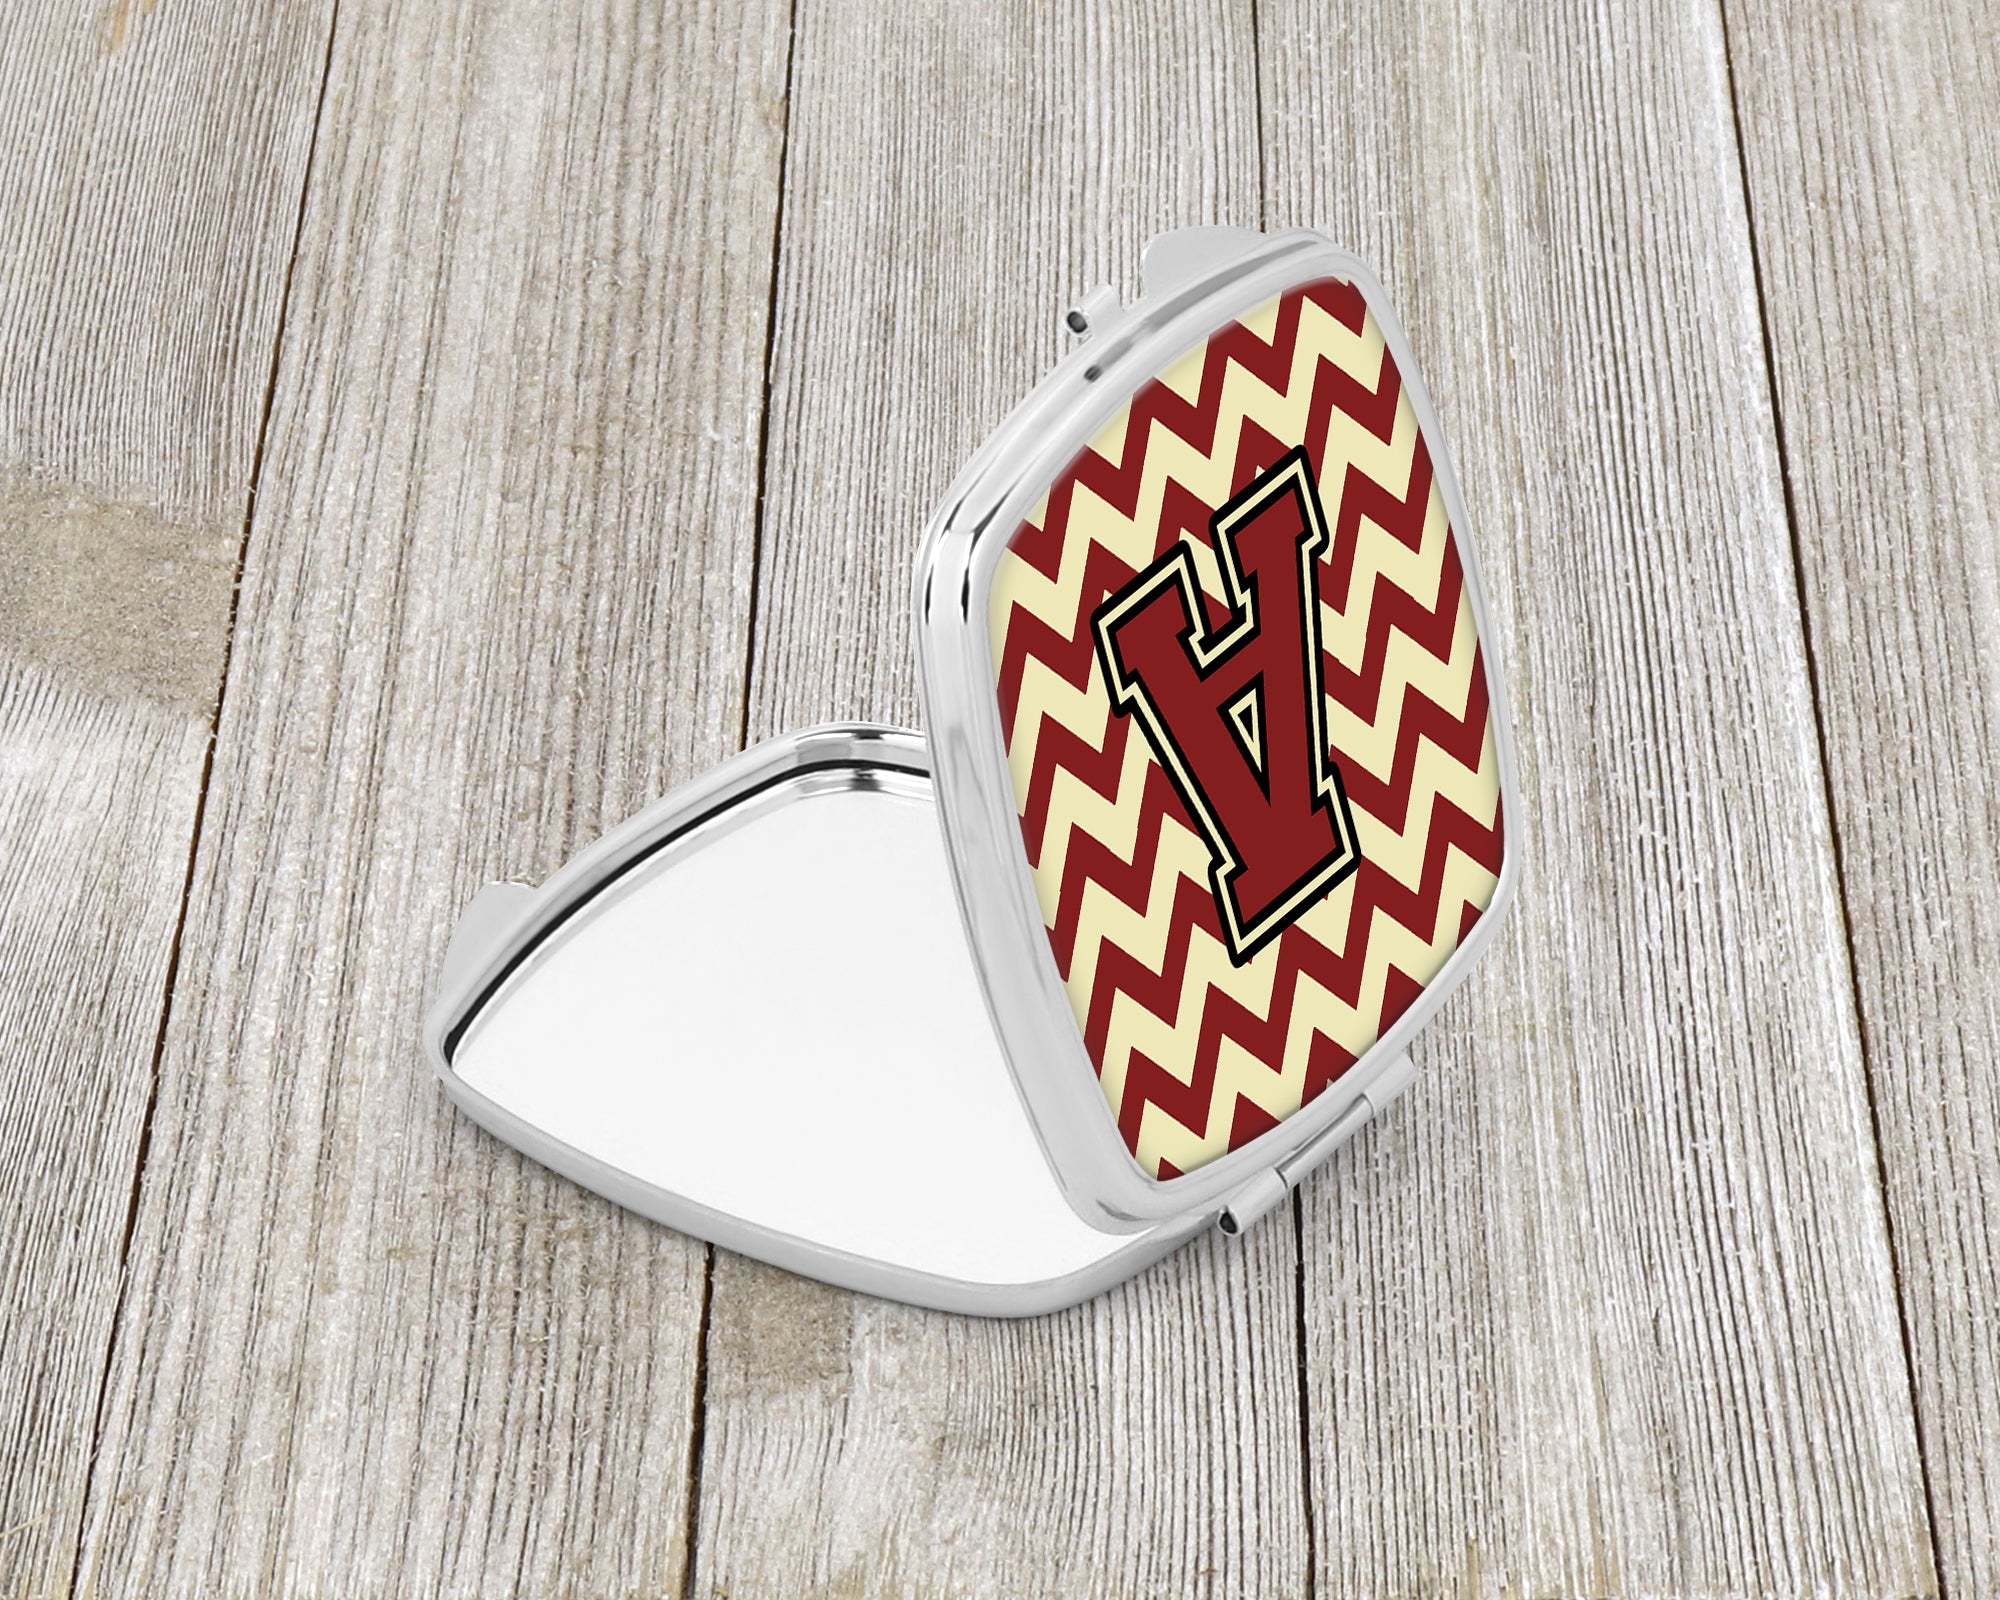 Letter A Chevron Maroon and Gold Compact Mirror CJ1061-ASCM  the-store.com.